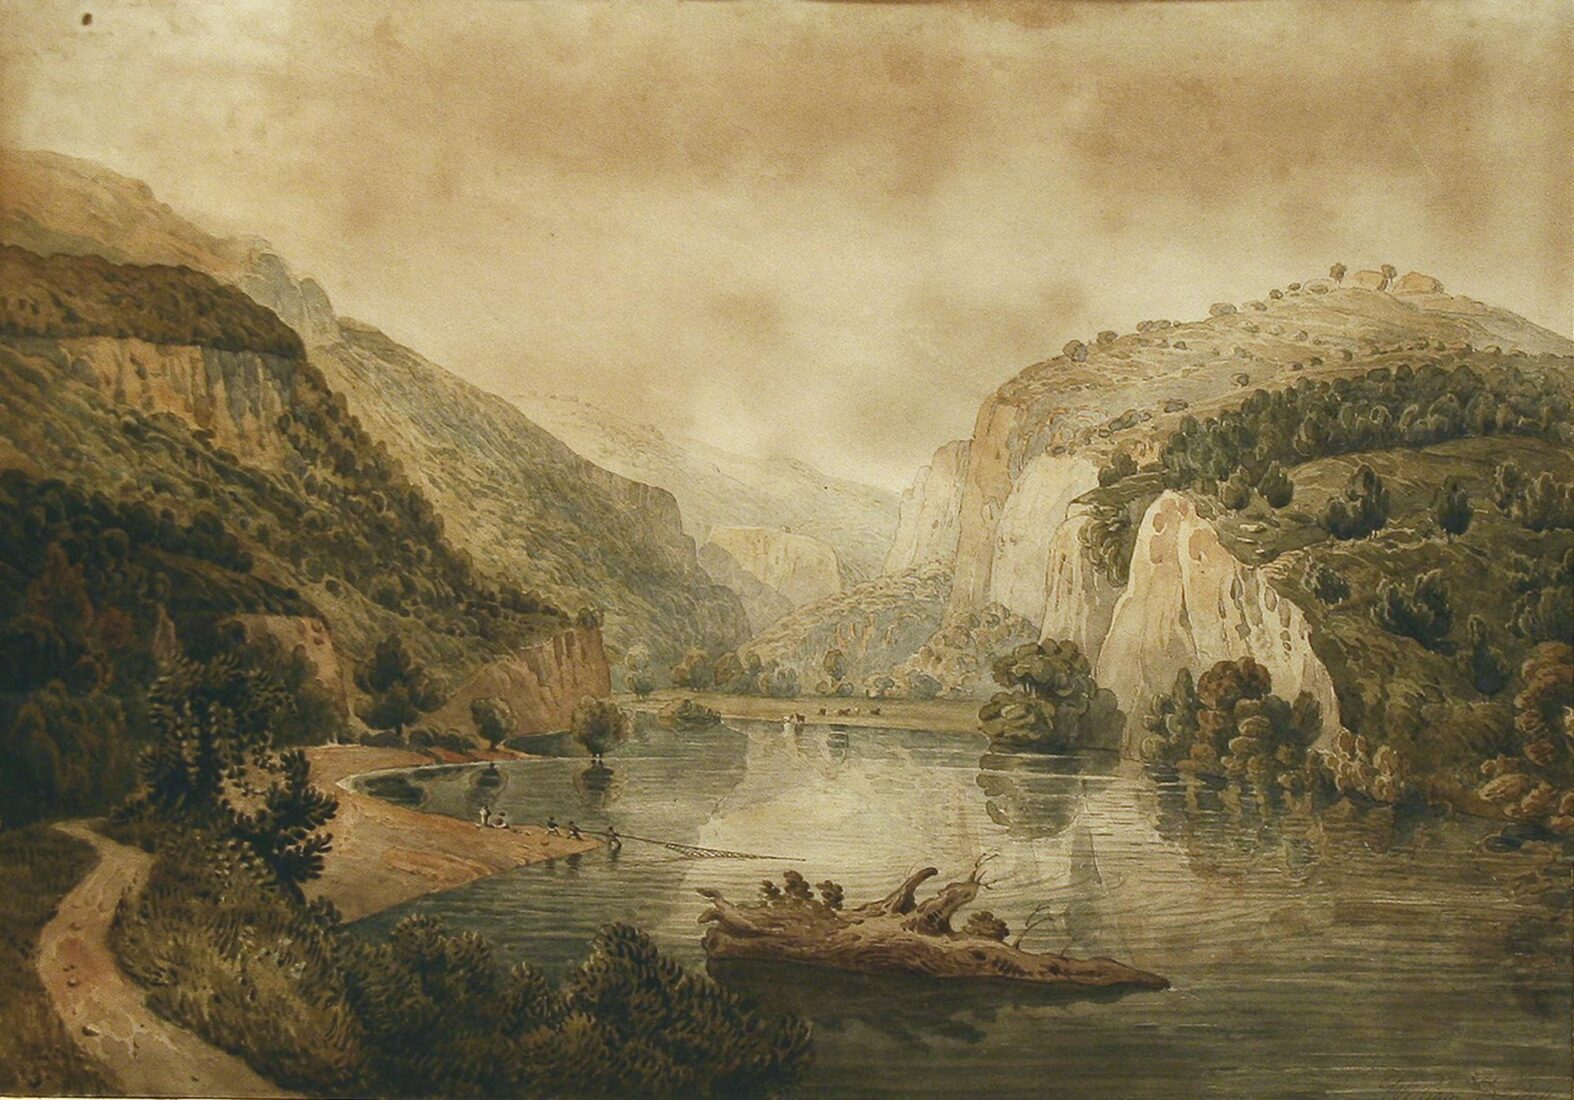 The East Entrance of the Pass of Tempe - Daniell William